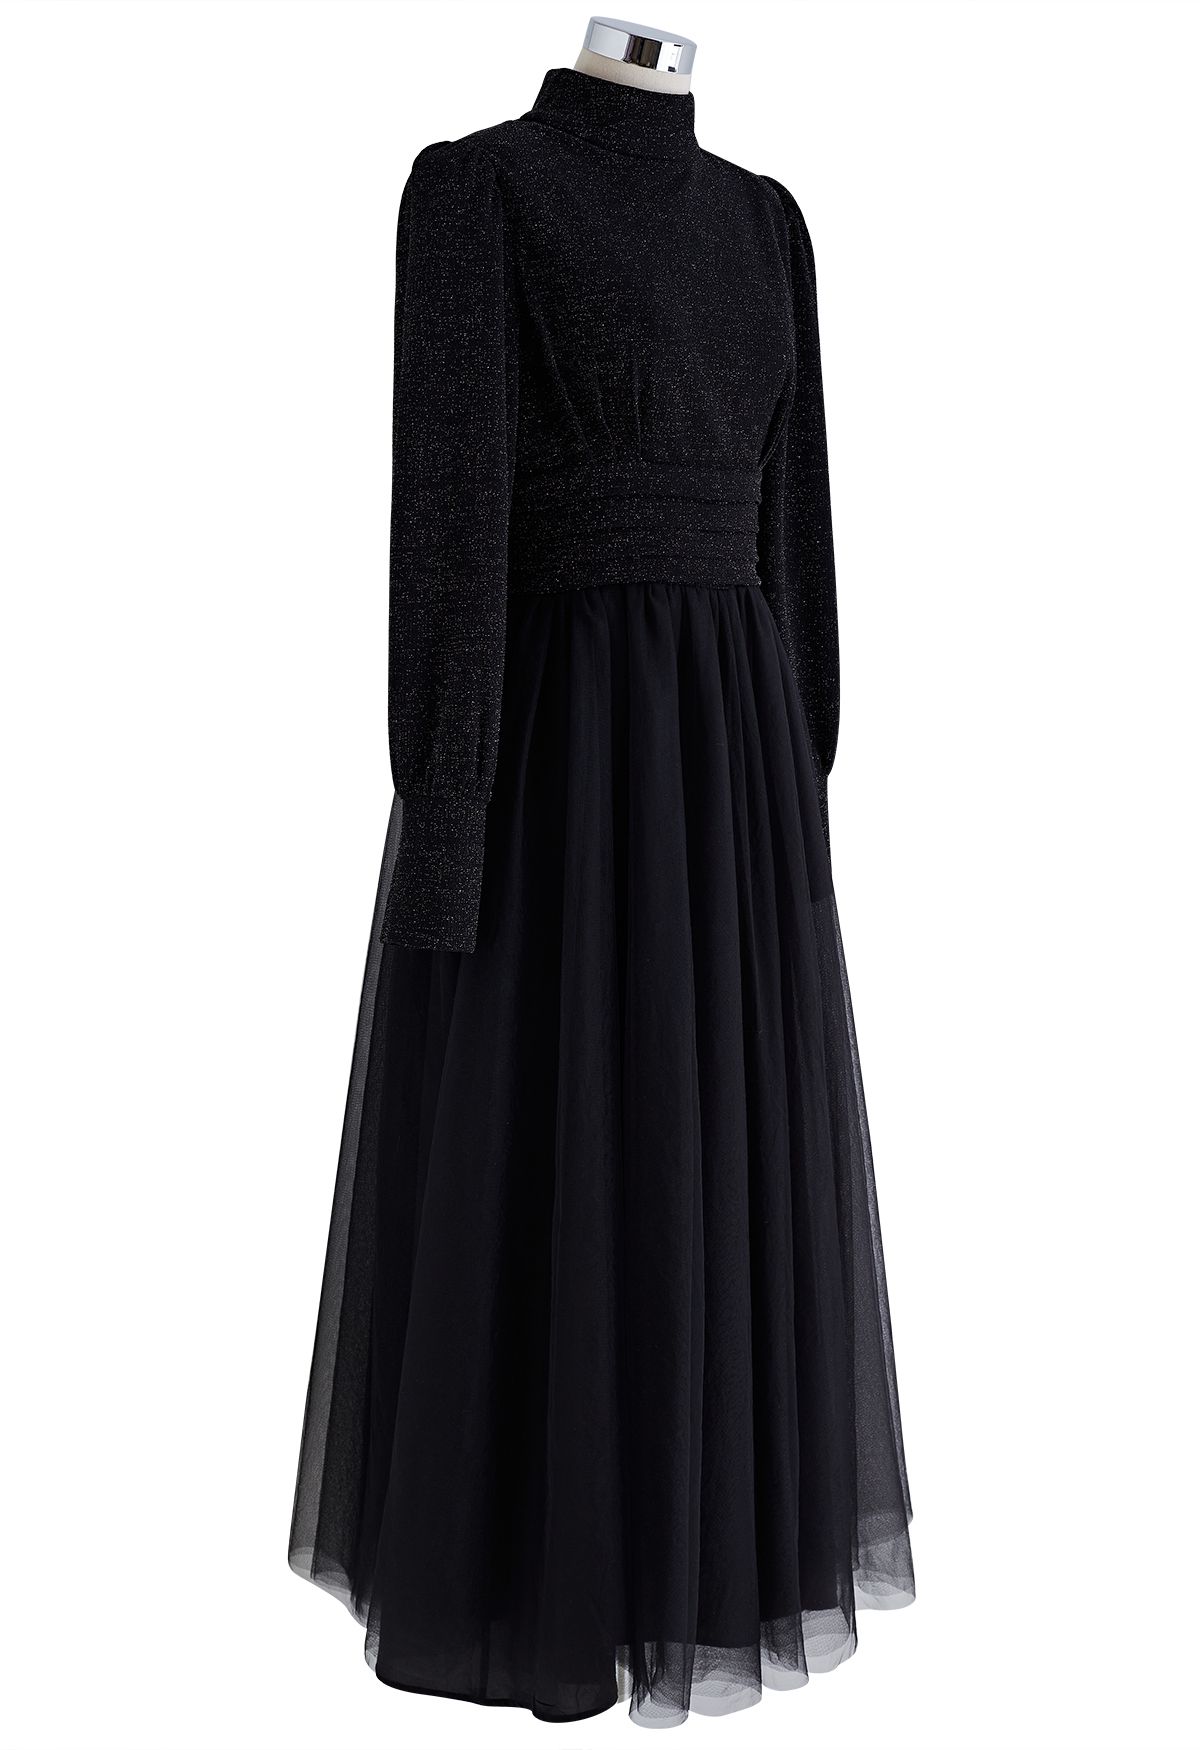 Shine Bright High Neck Tulle Maxi Dress in Shimmer Black